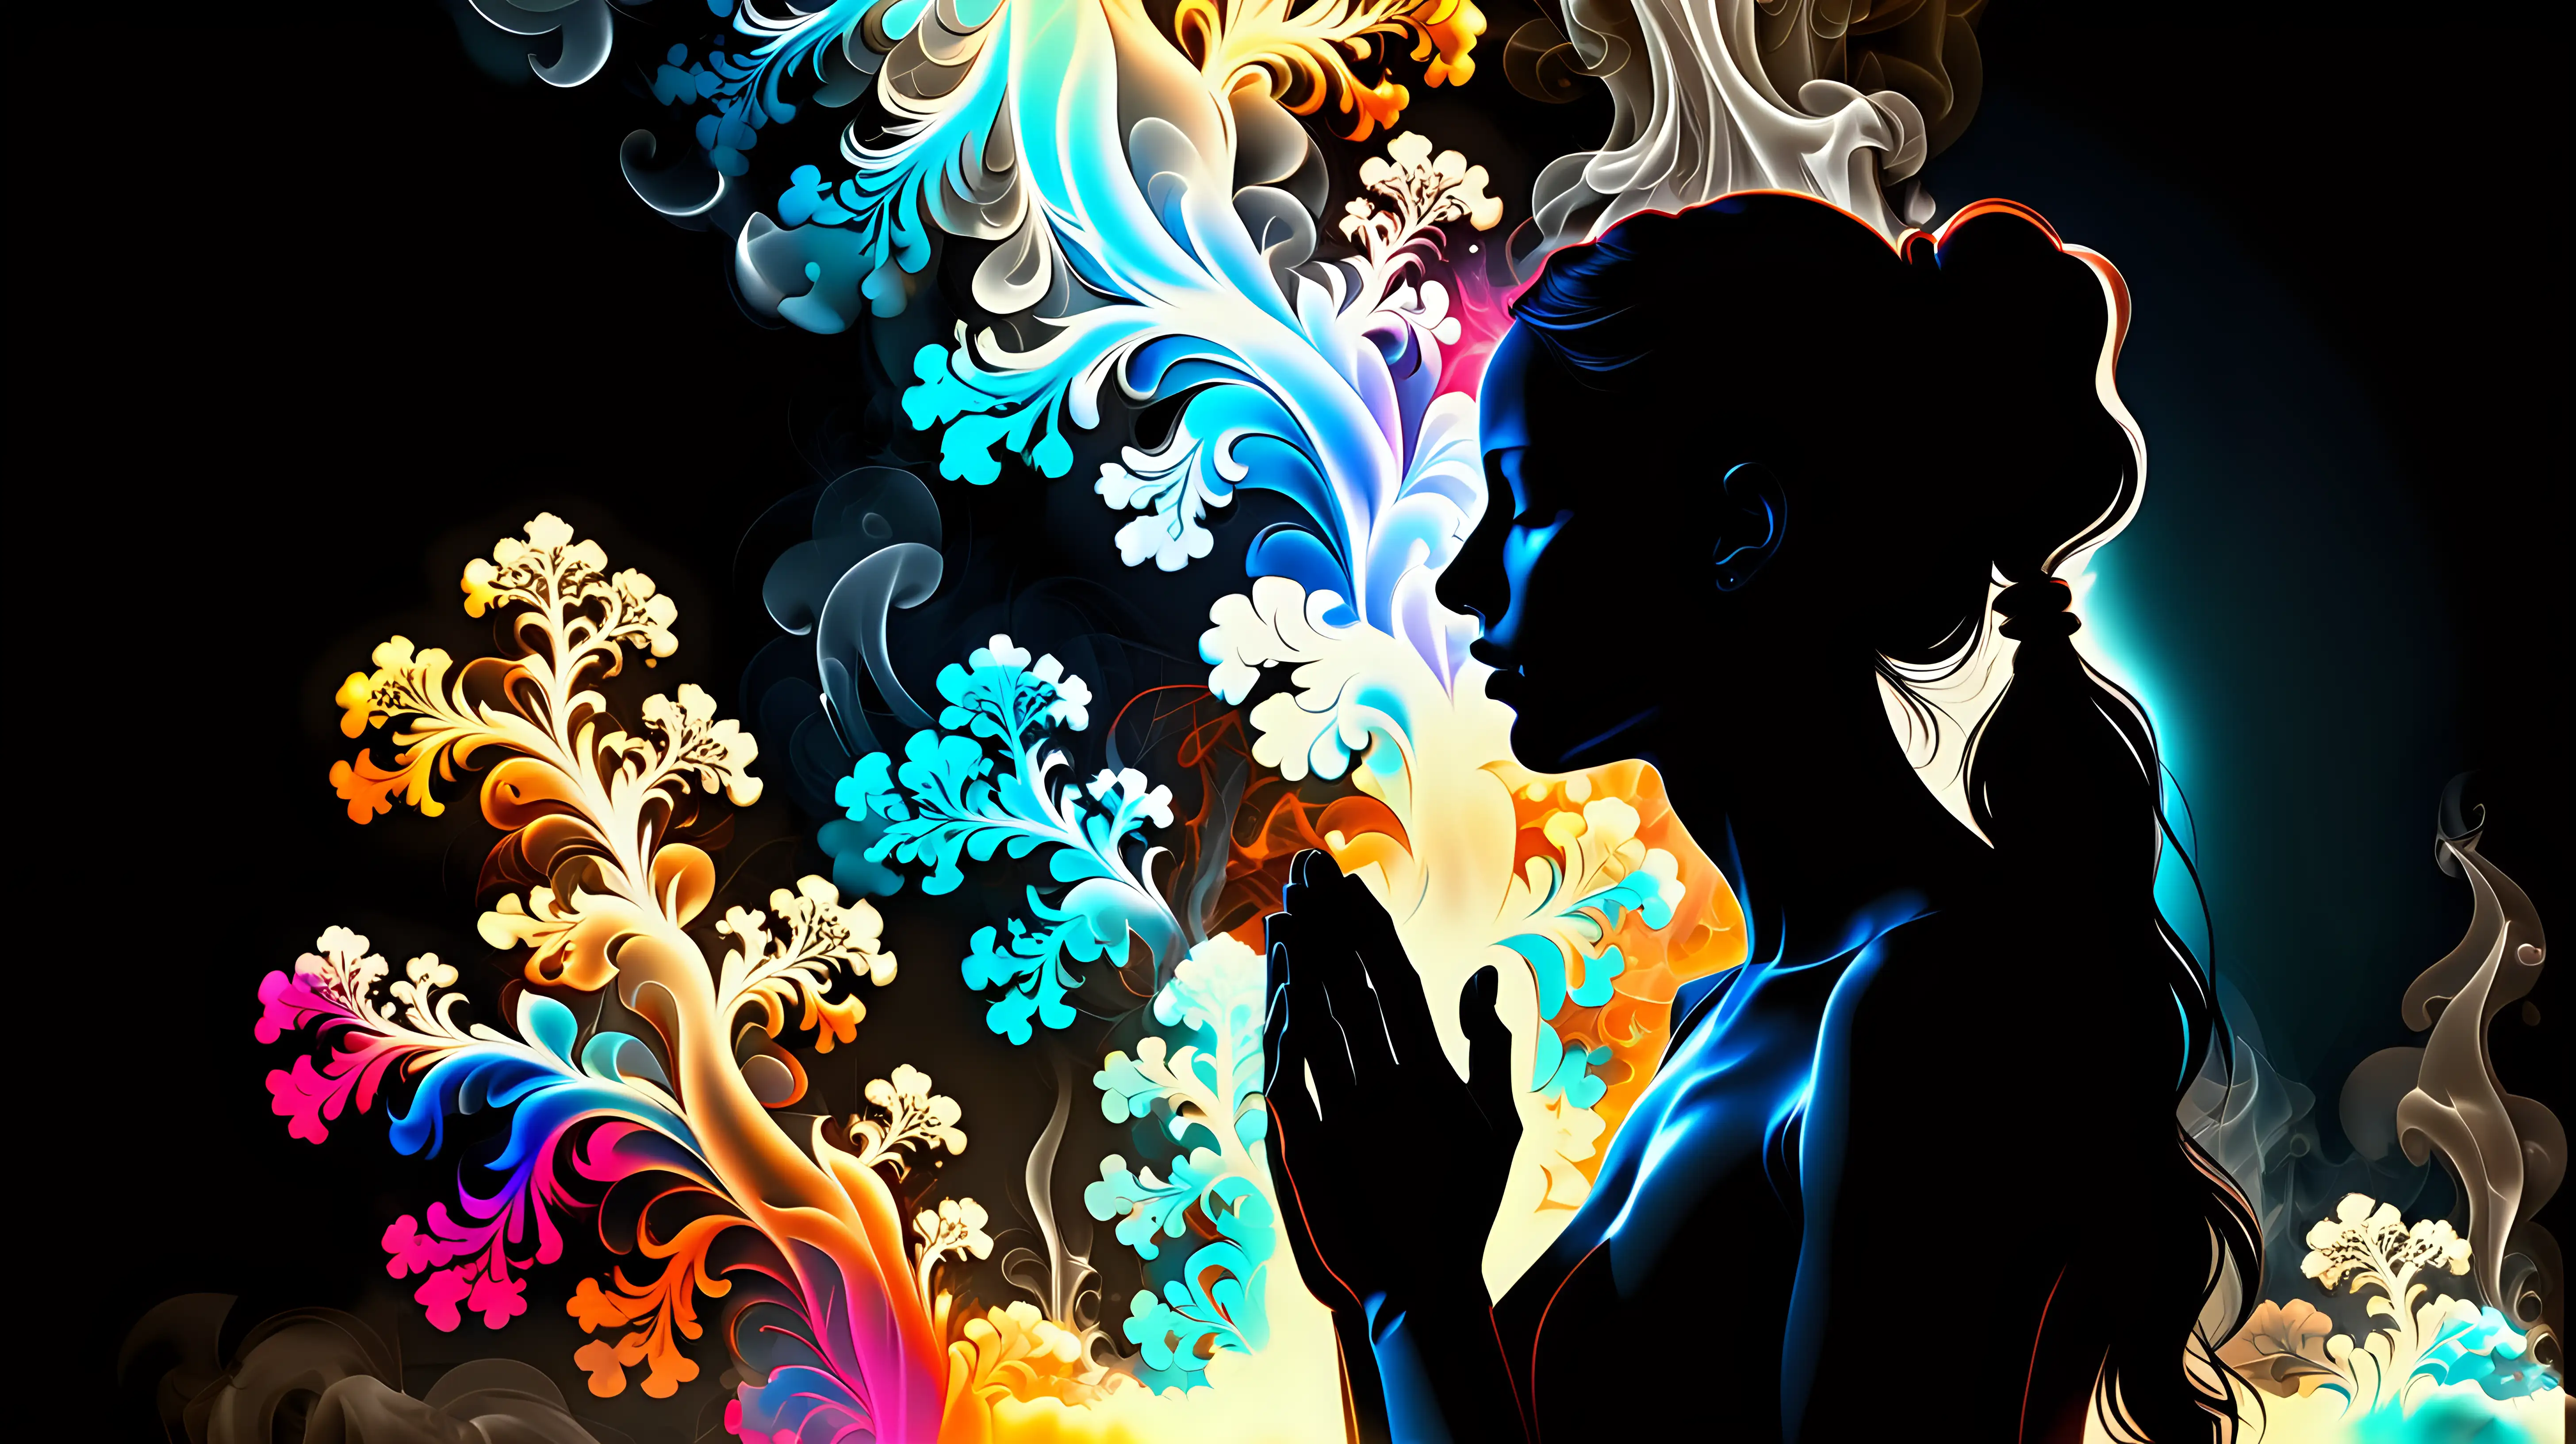 Vibrant Silhouette of a Woman in Prayer Amidst Colorful Smoke Fractals